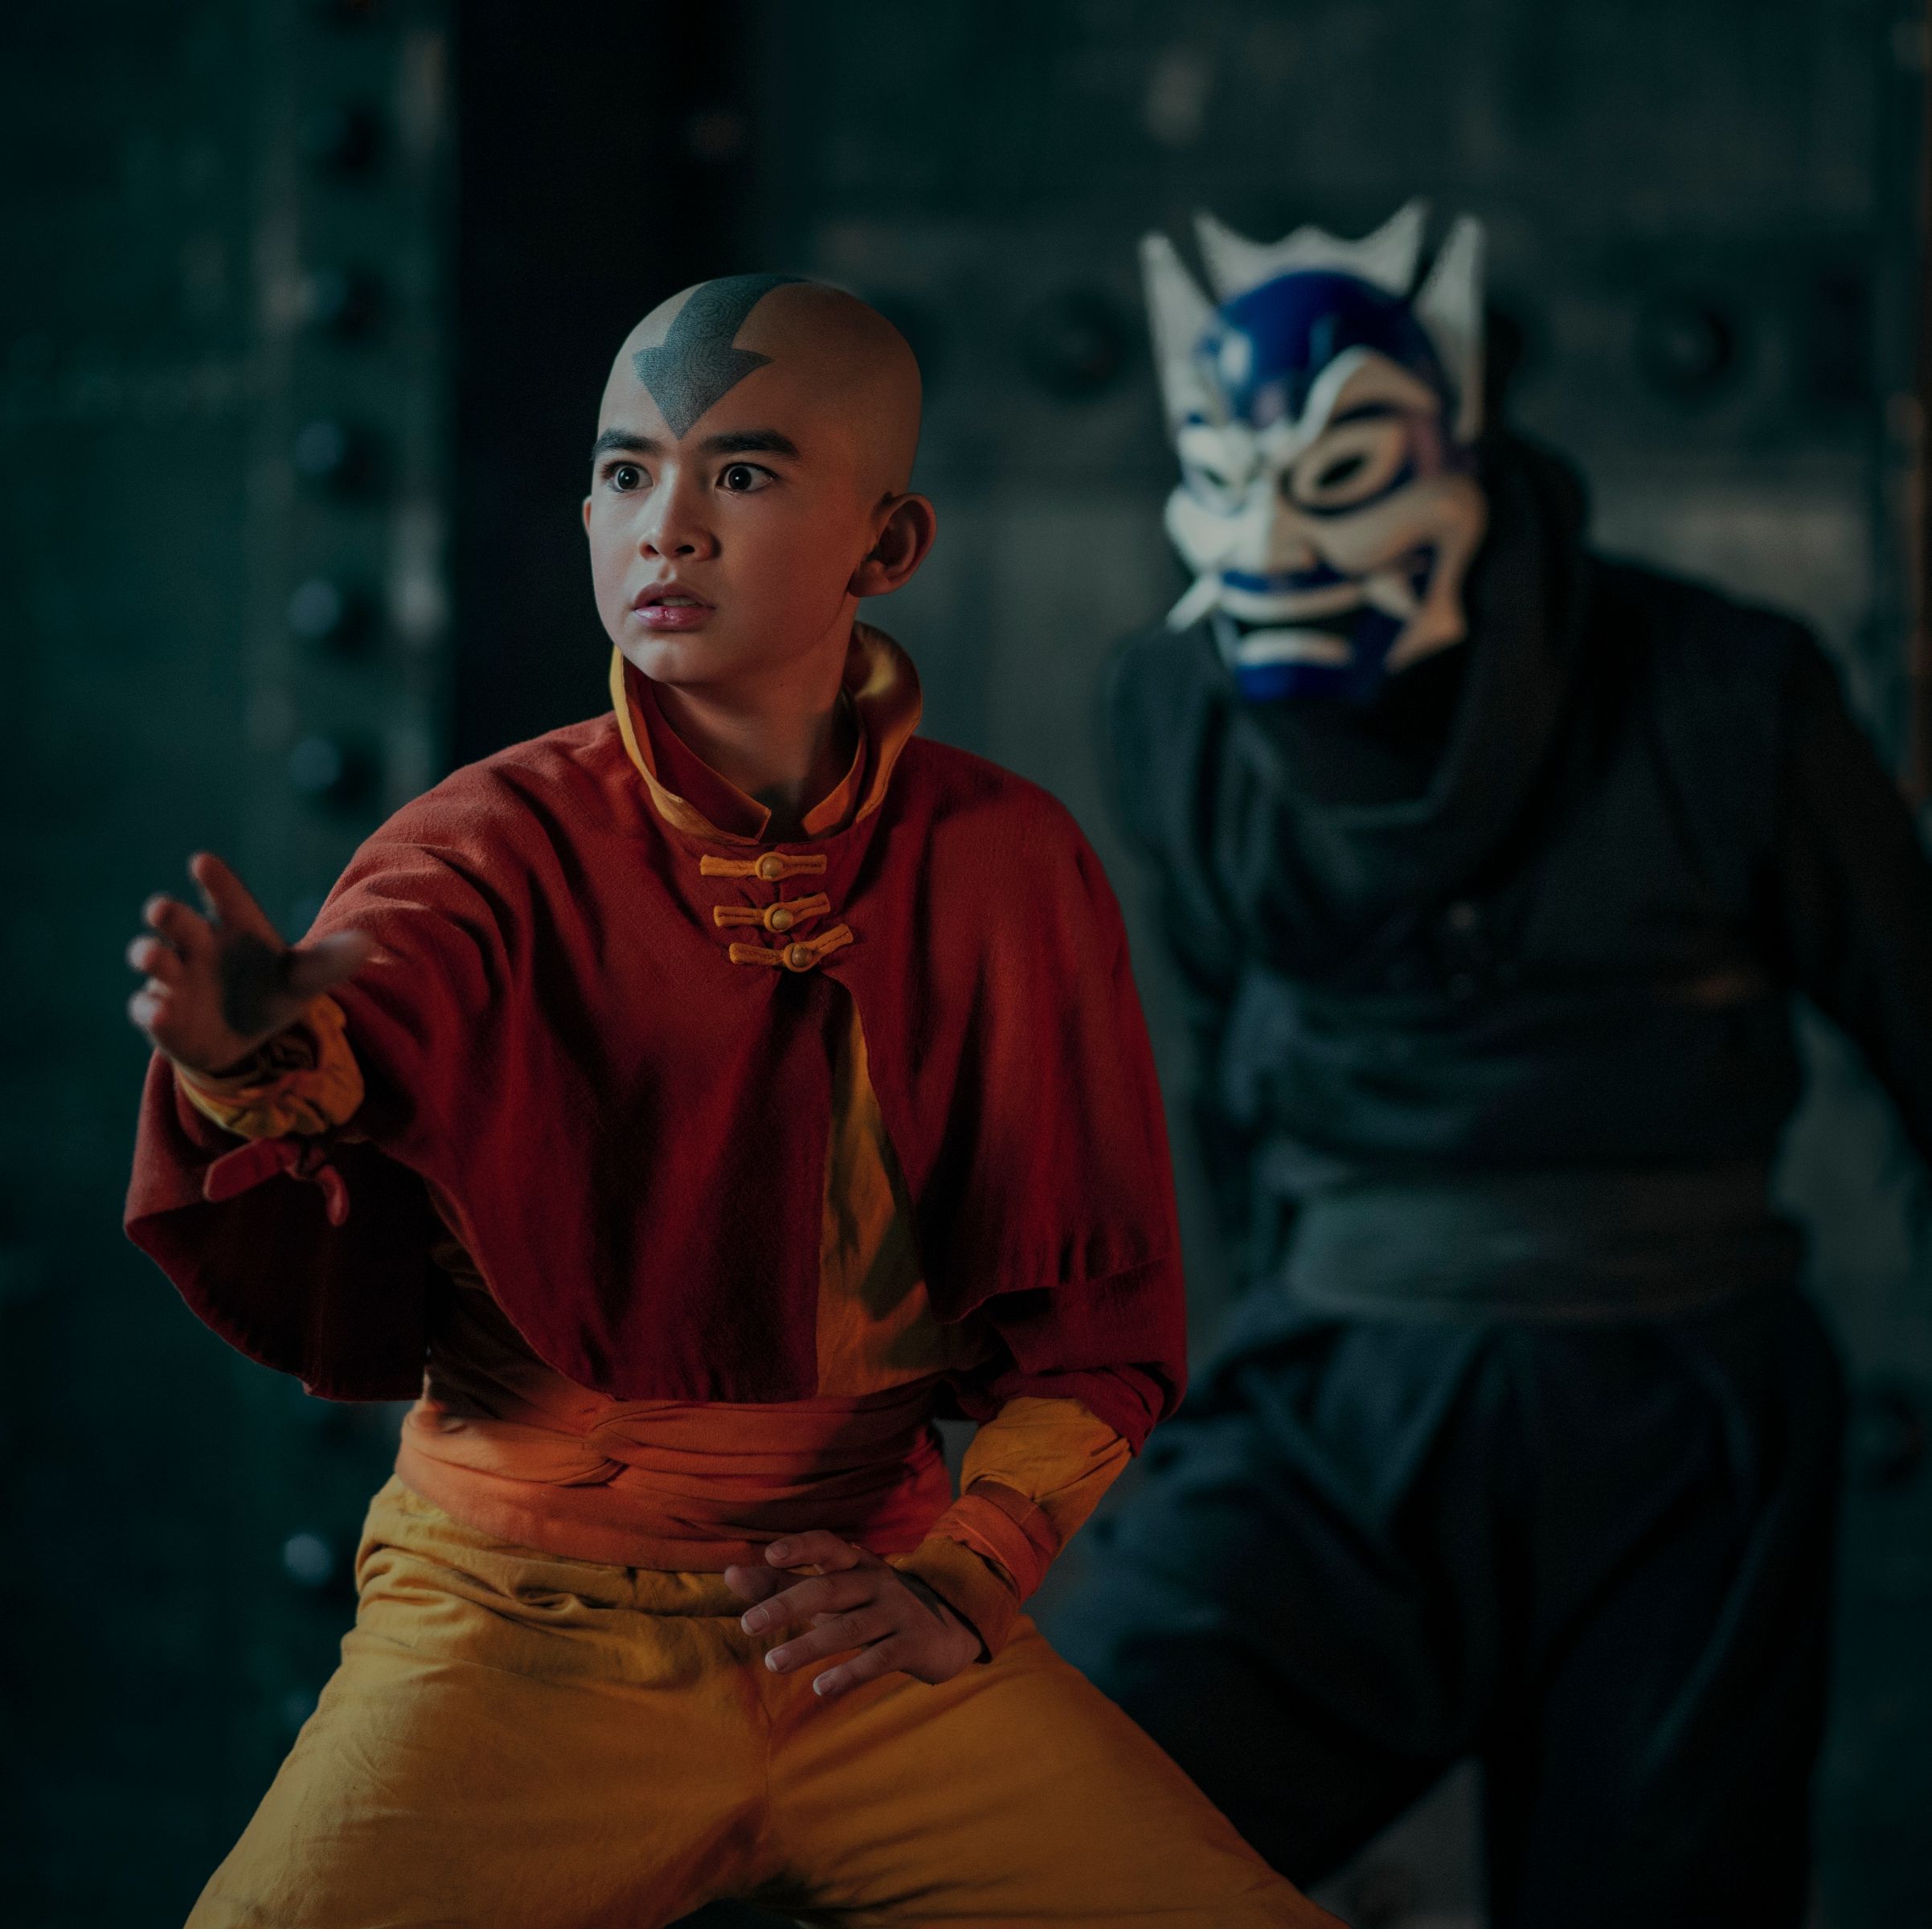 All the Episodes the 'Avatar: The Last Airbender' Live-Action Series Covers From the Original Animation